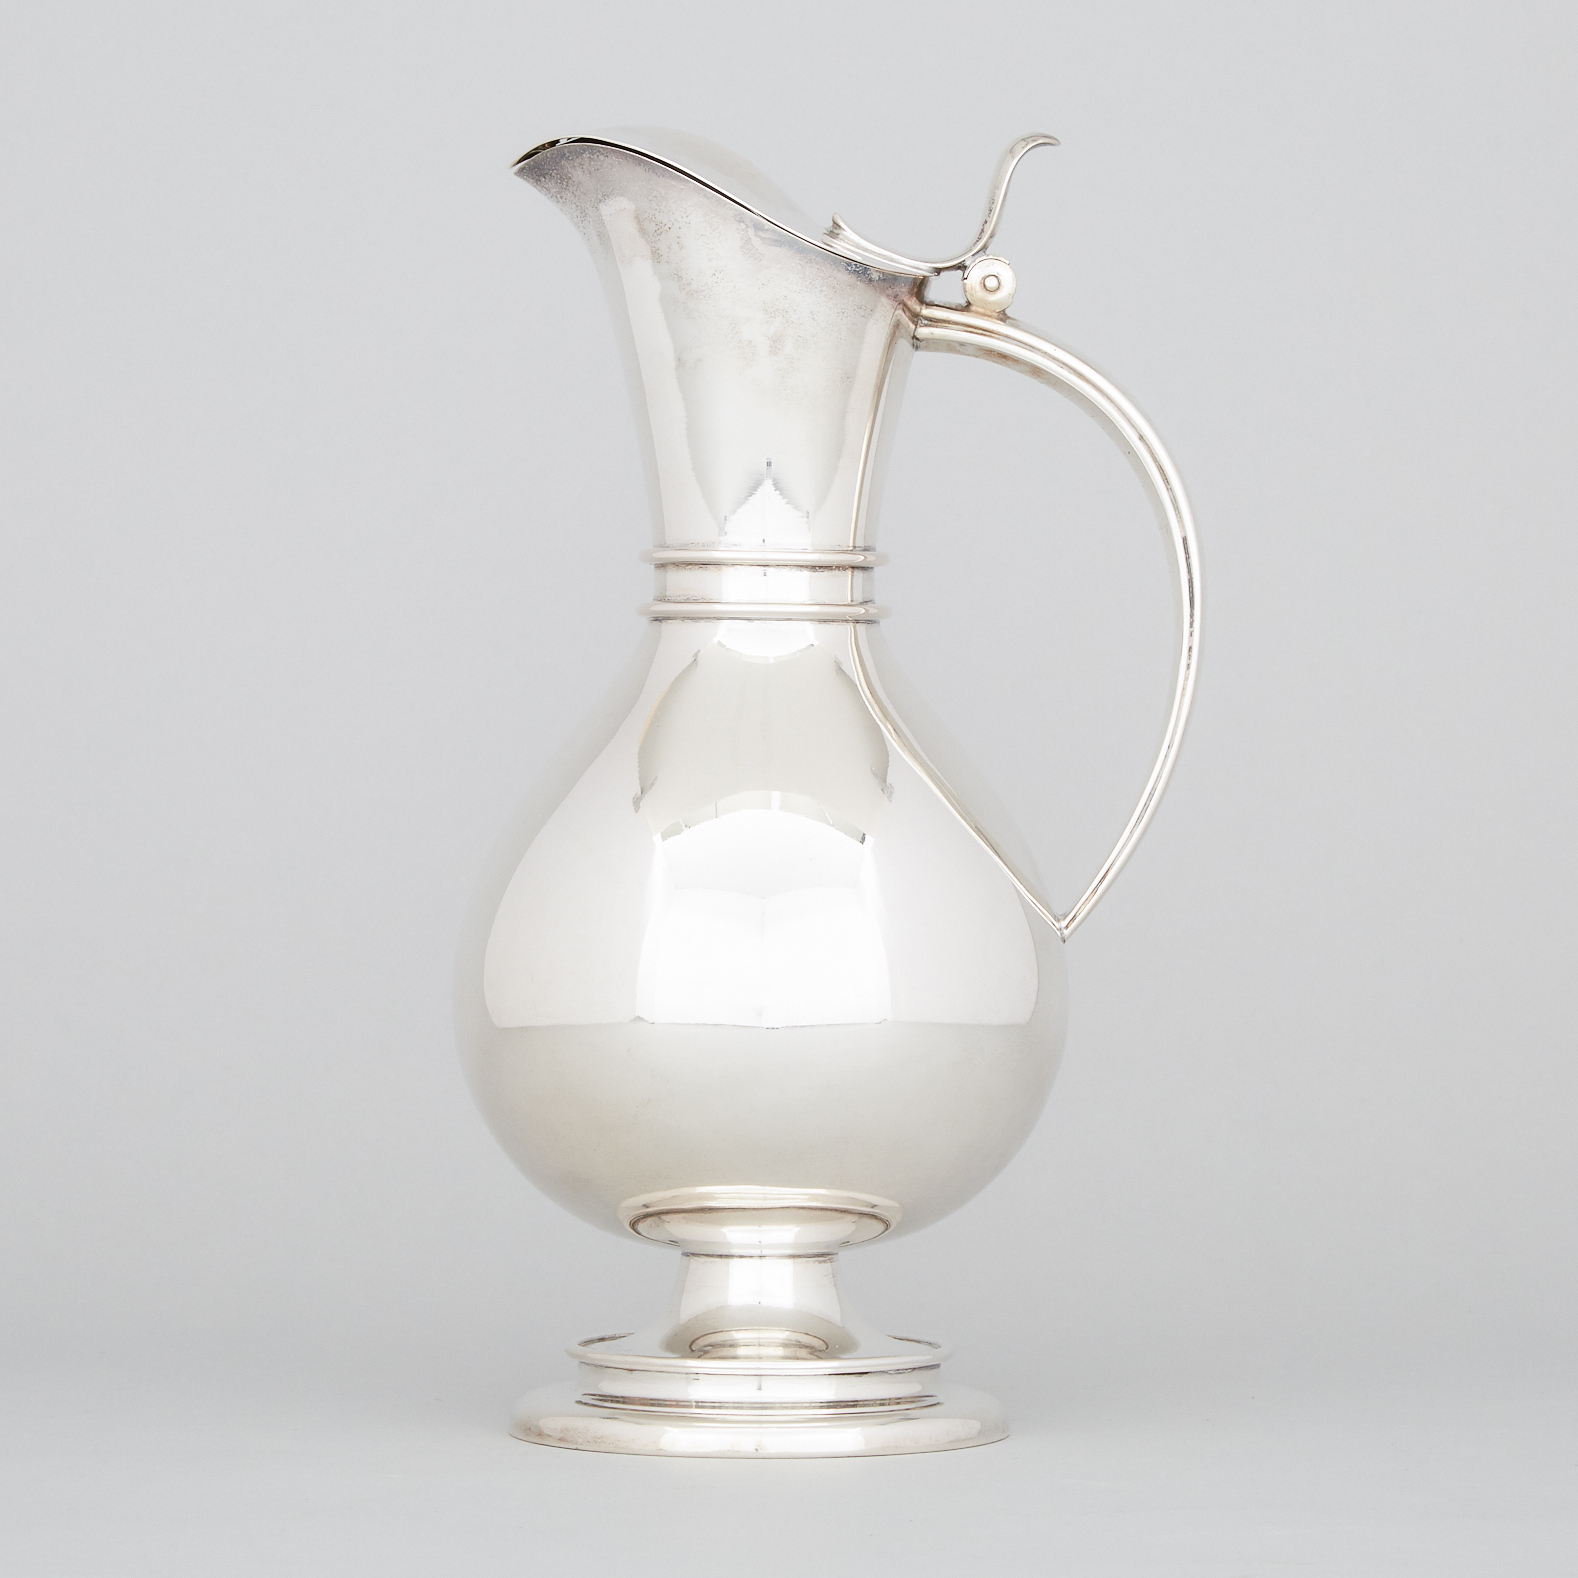 German Silver Covered Jug, Wilkens & Söhne, Bremen, early 20th century